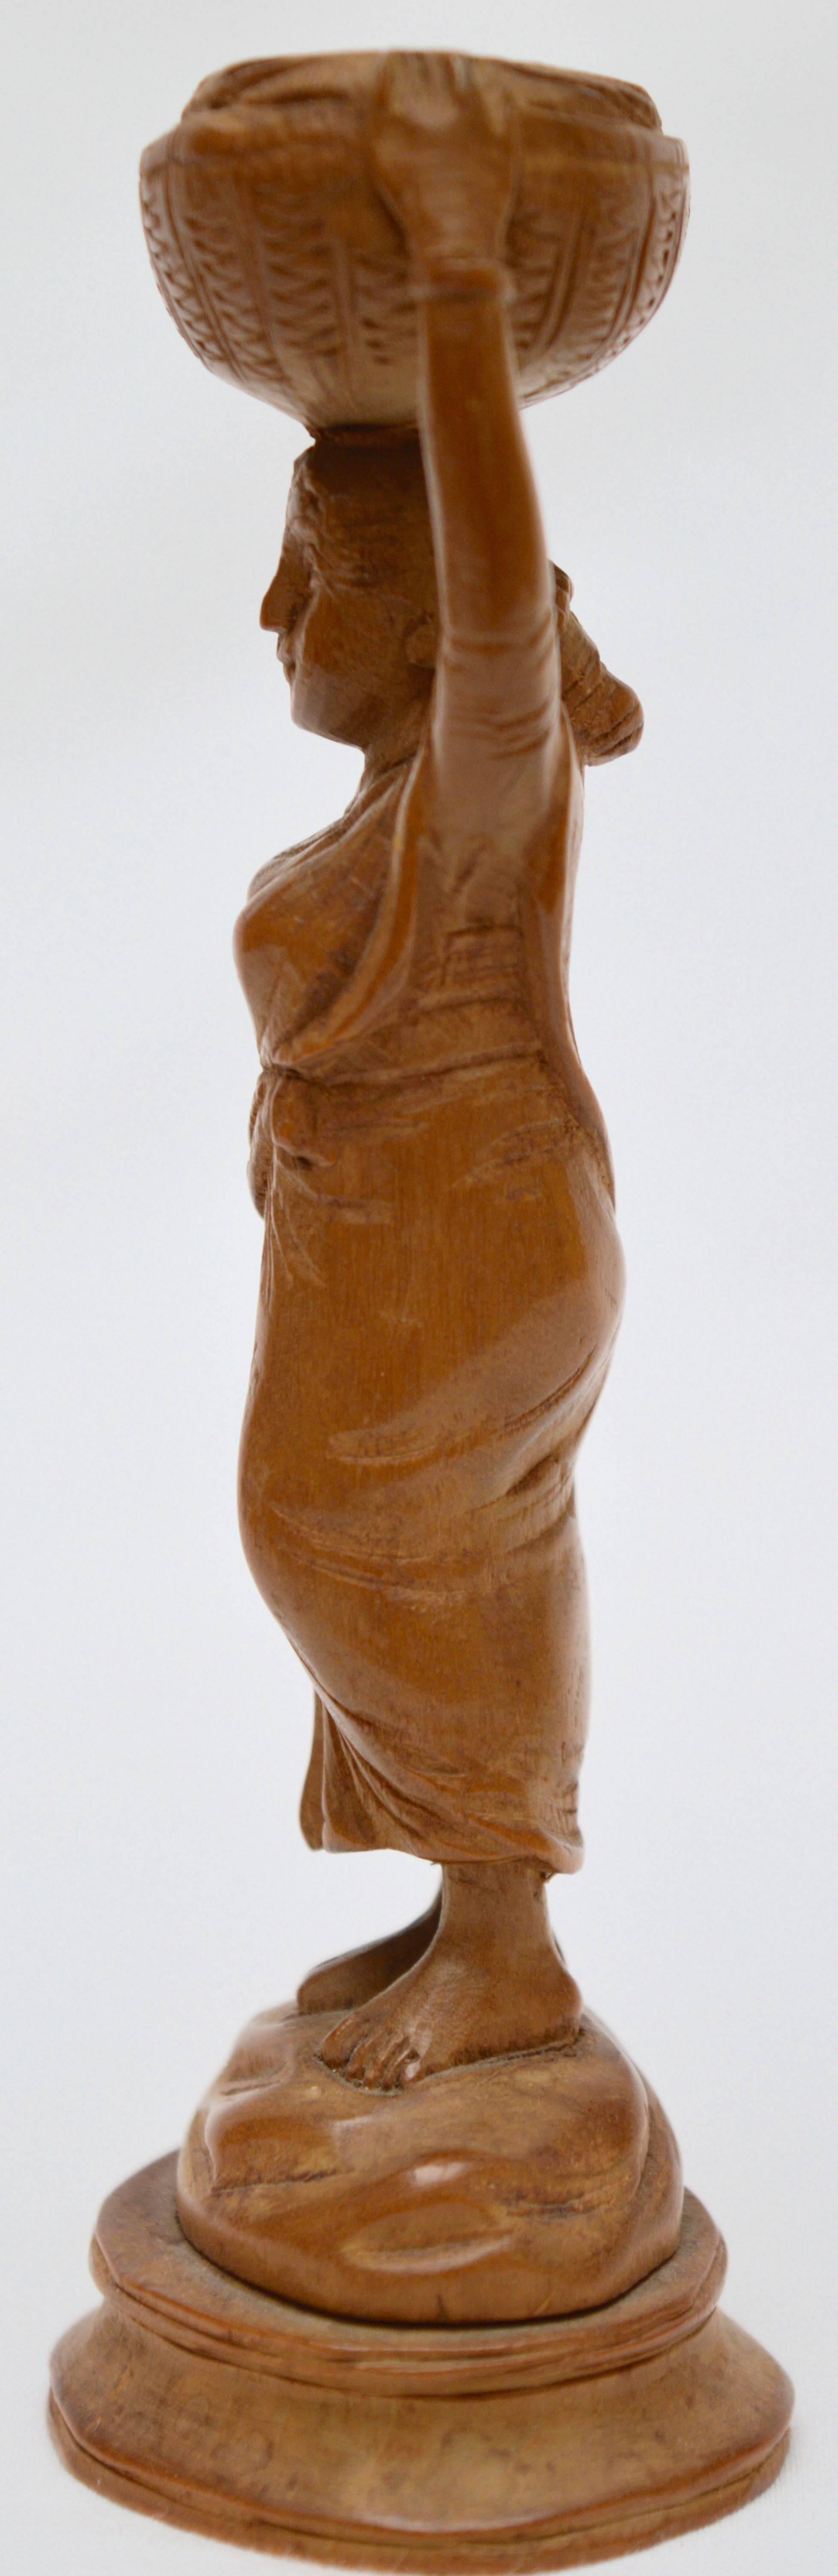 Hand-Carved Early 19th Century Italian Carved Wood Figure For Sale